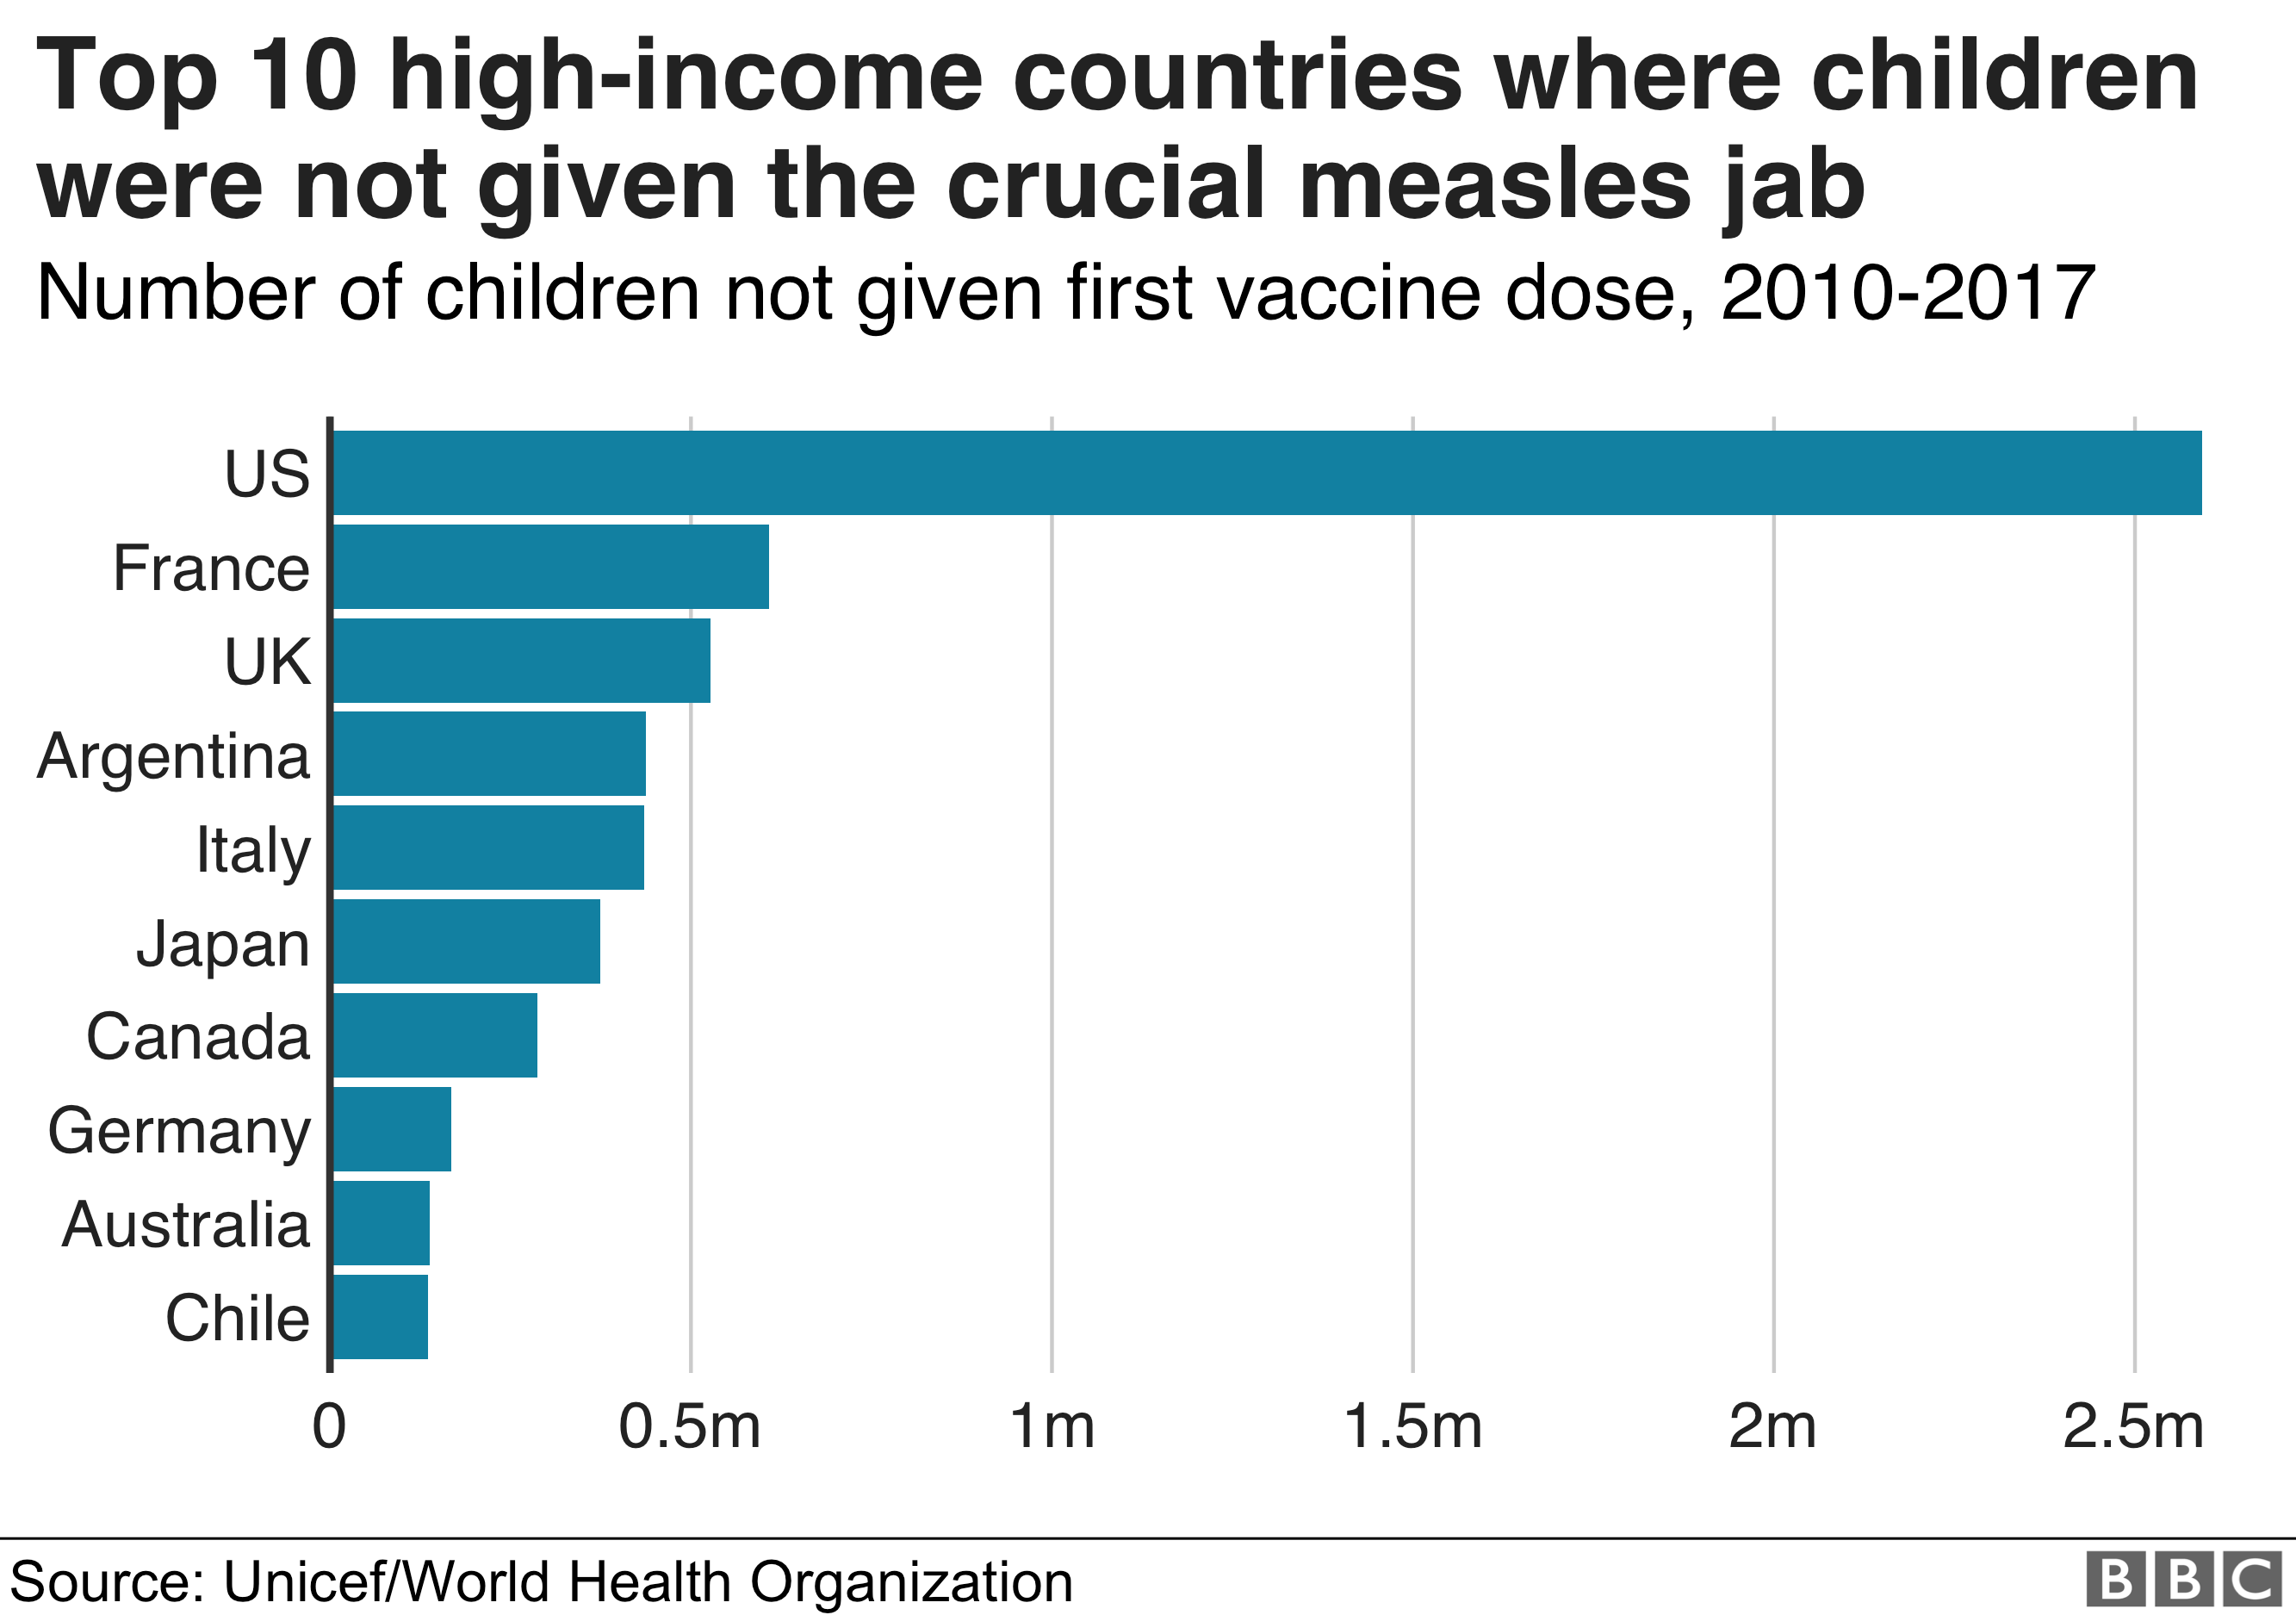 Chart showing the top 10 high-income countries where children were not given the crucial measles jab